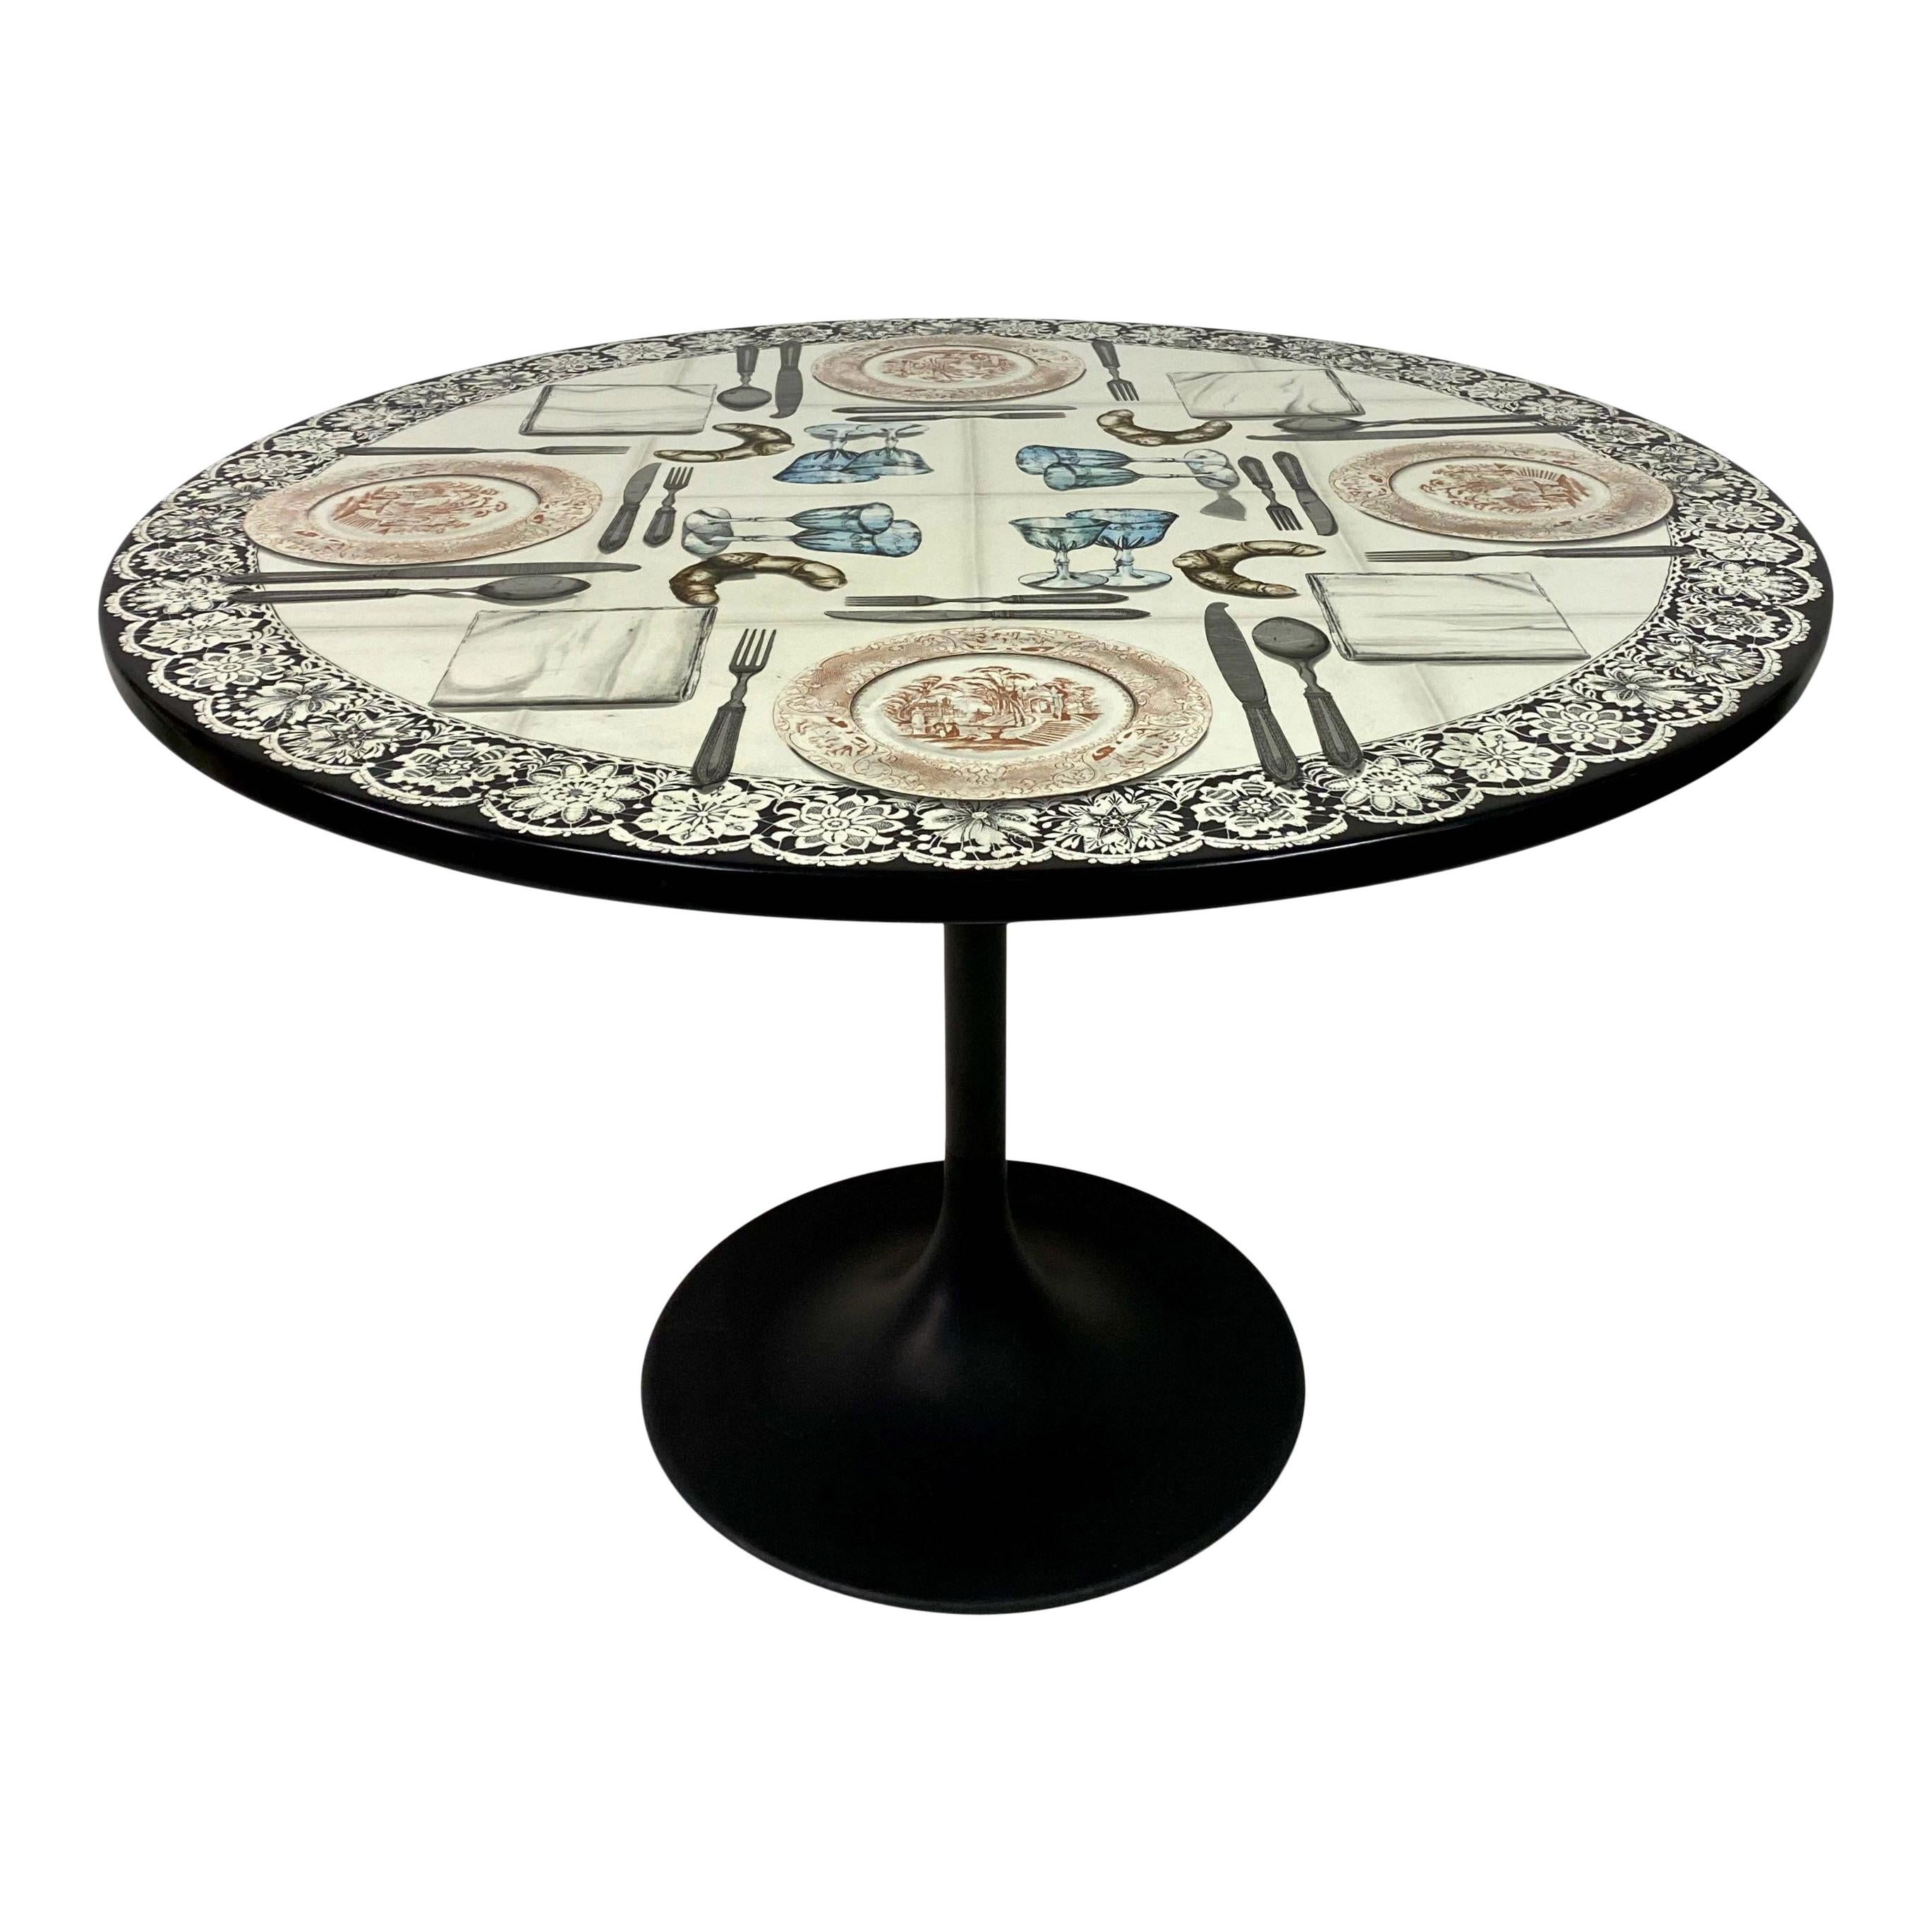 Vintage Fornasetti Tromp L'oeil Dining or Centre Table